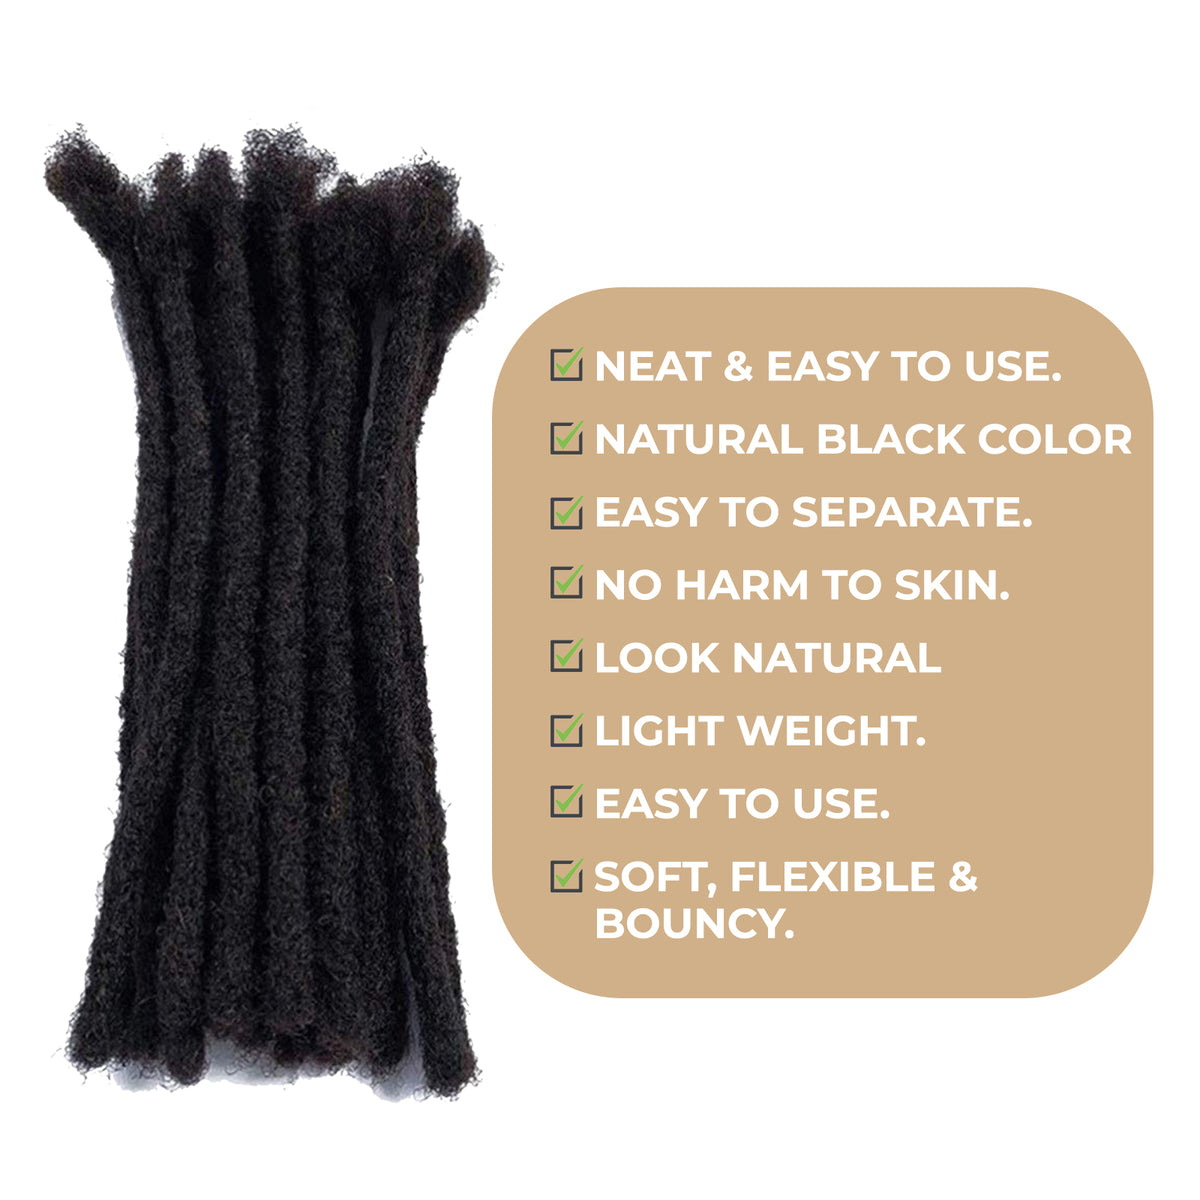 100% Human Hair Dreadlock Extensions 8Inch 10 Strands Handmade Natural Loc Extensions Human Hair Bundle Dreads Extensions For Woman & Men Can Be Dyed/Bleached (Natural Black 8 inch length 0.2cm Width